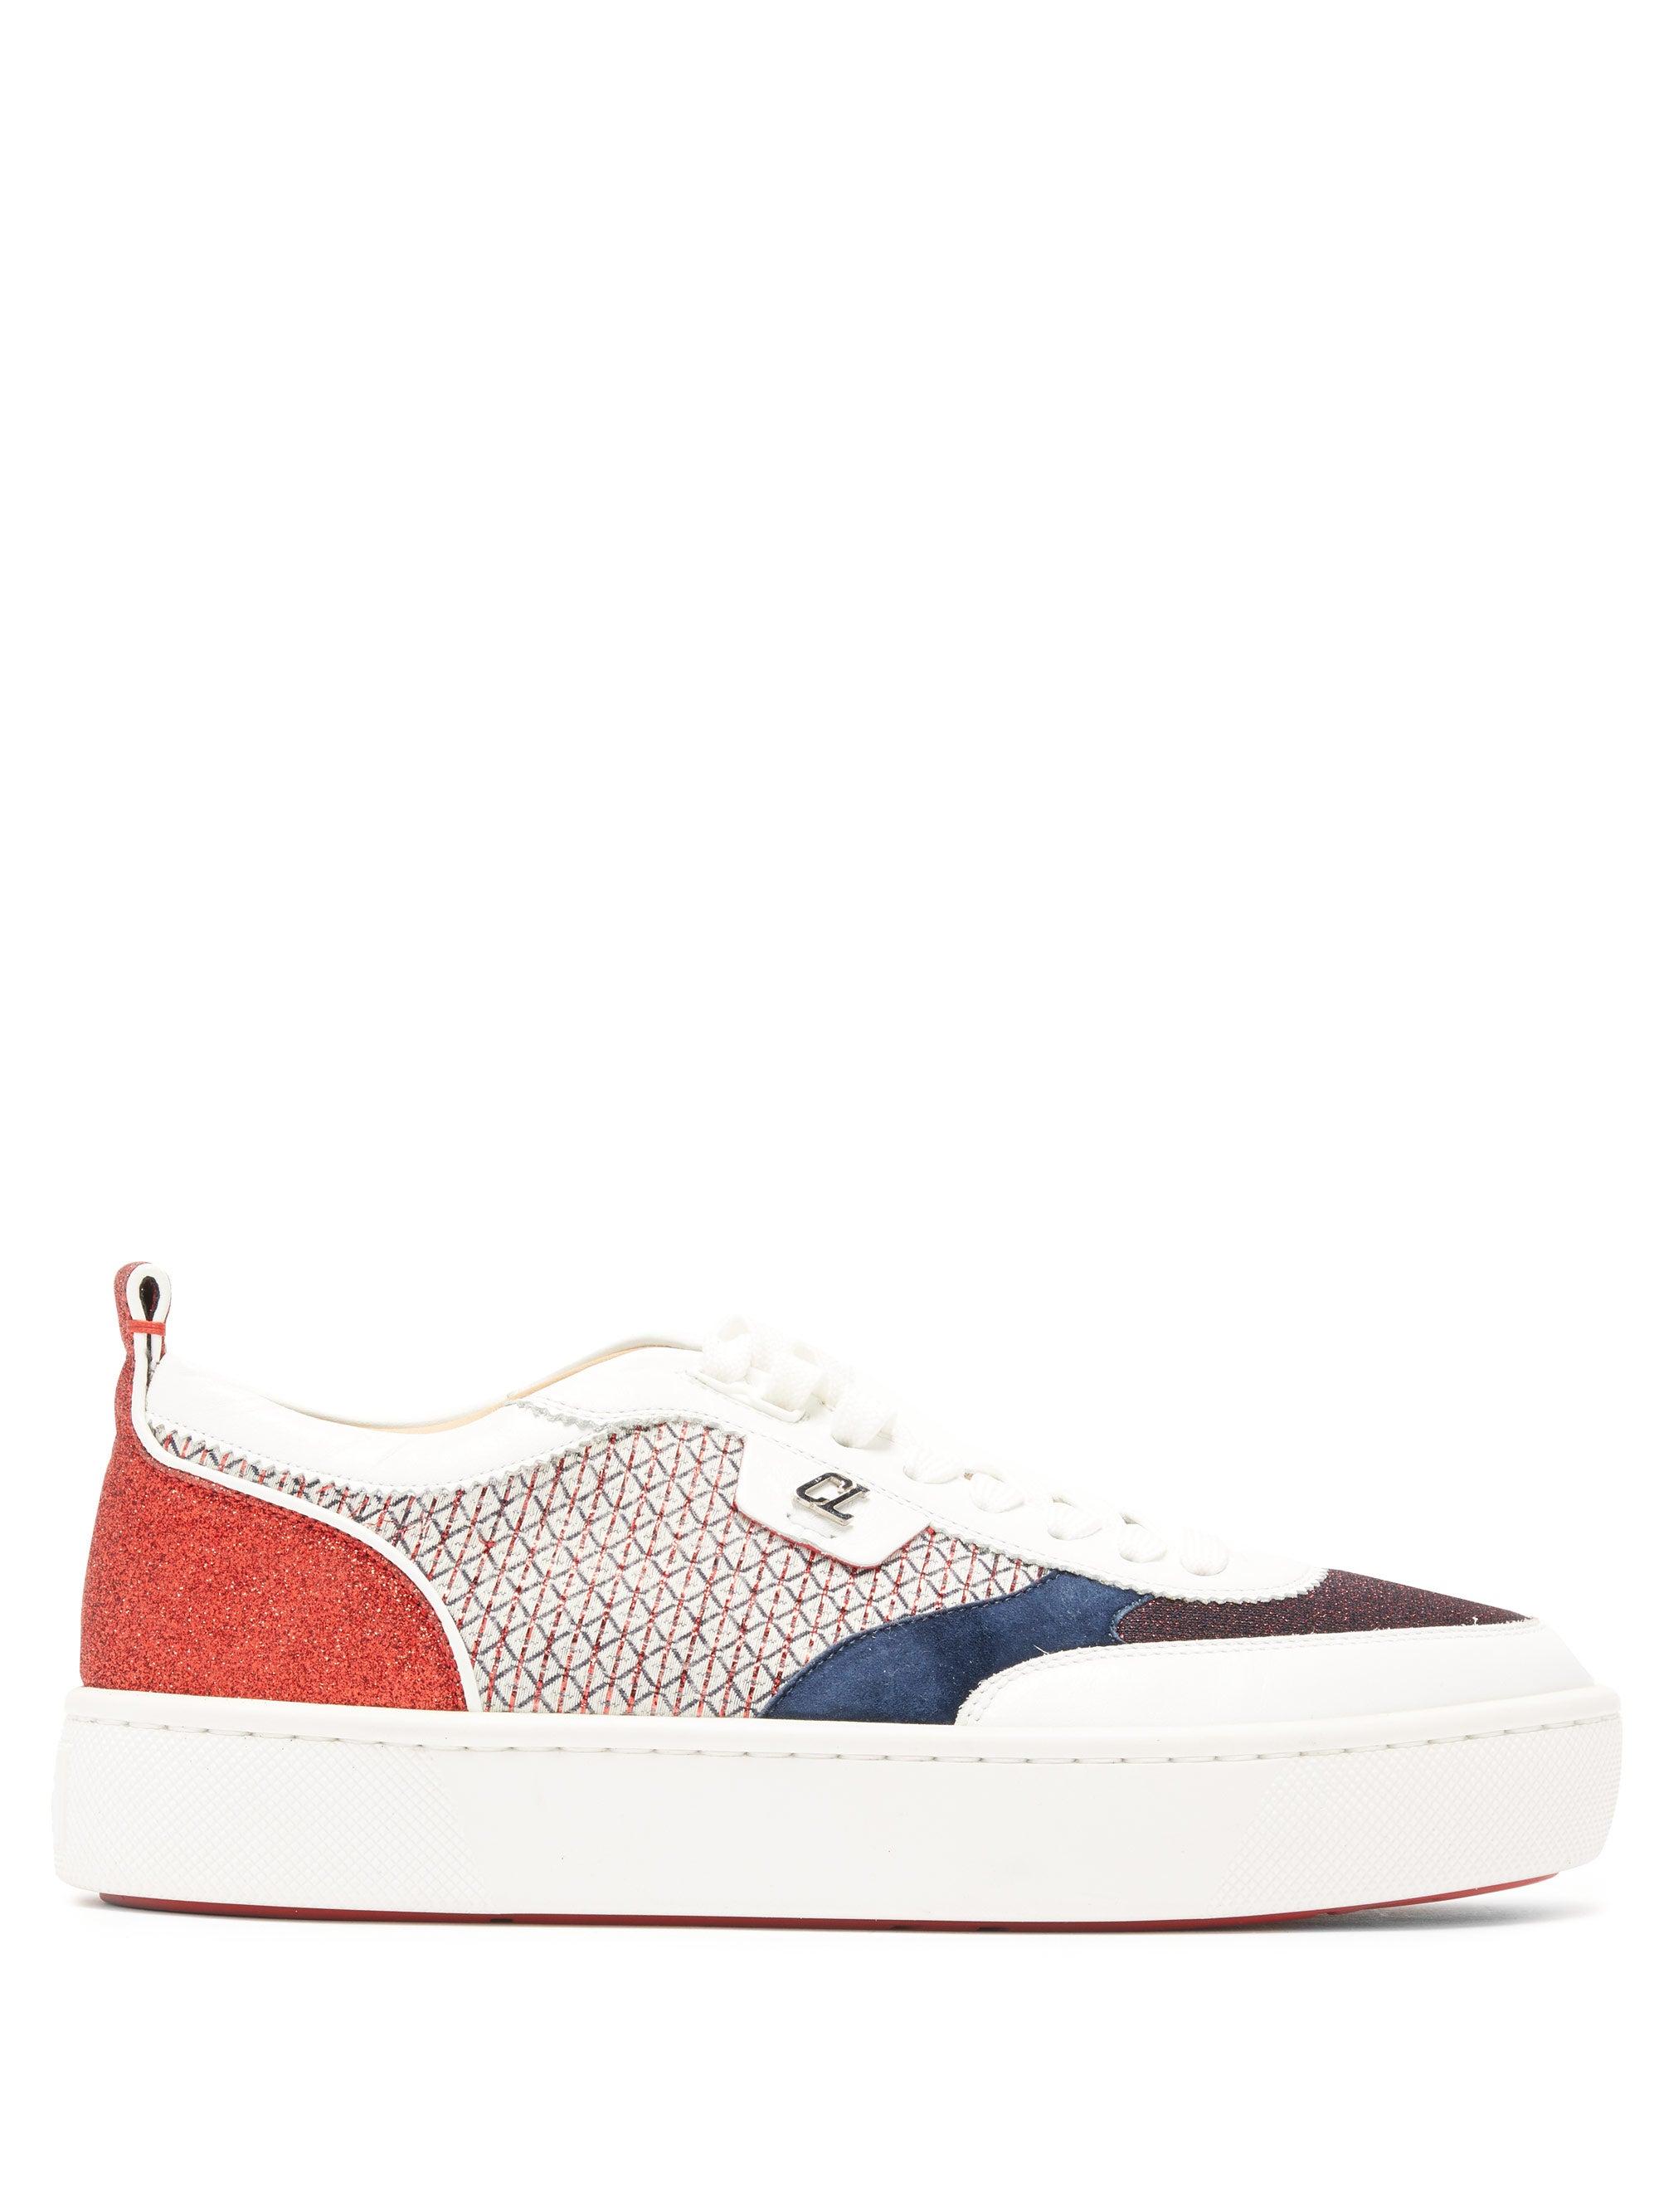 Christian Louboutin Happy Rui Glittered Leather Trainers in White 